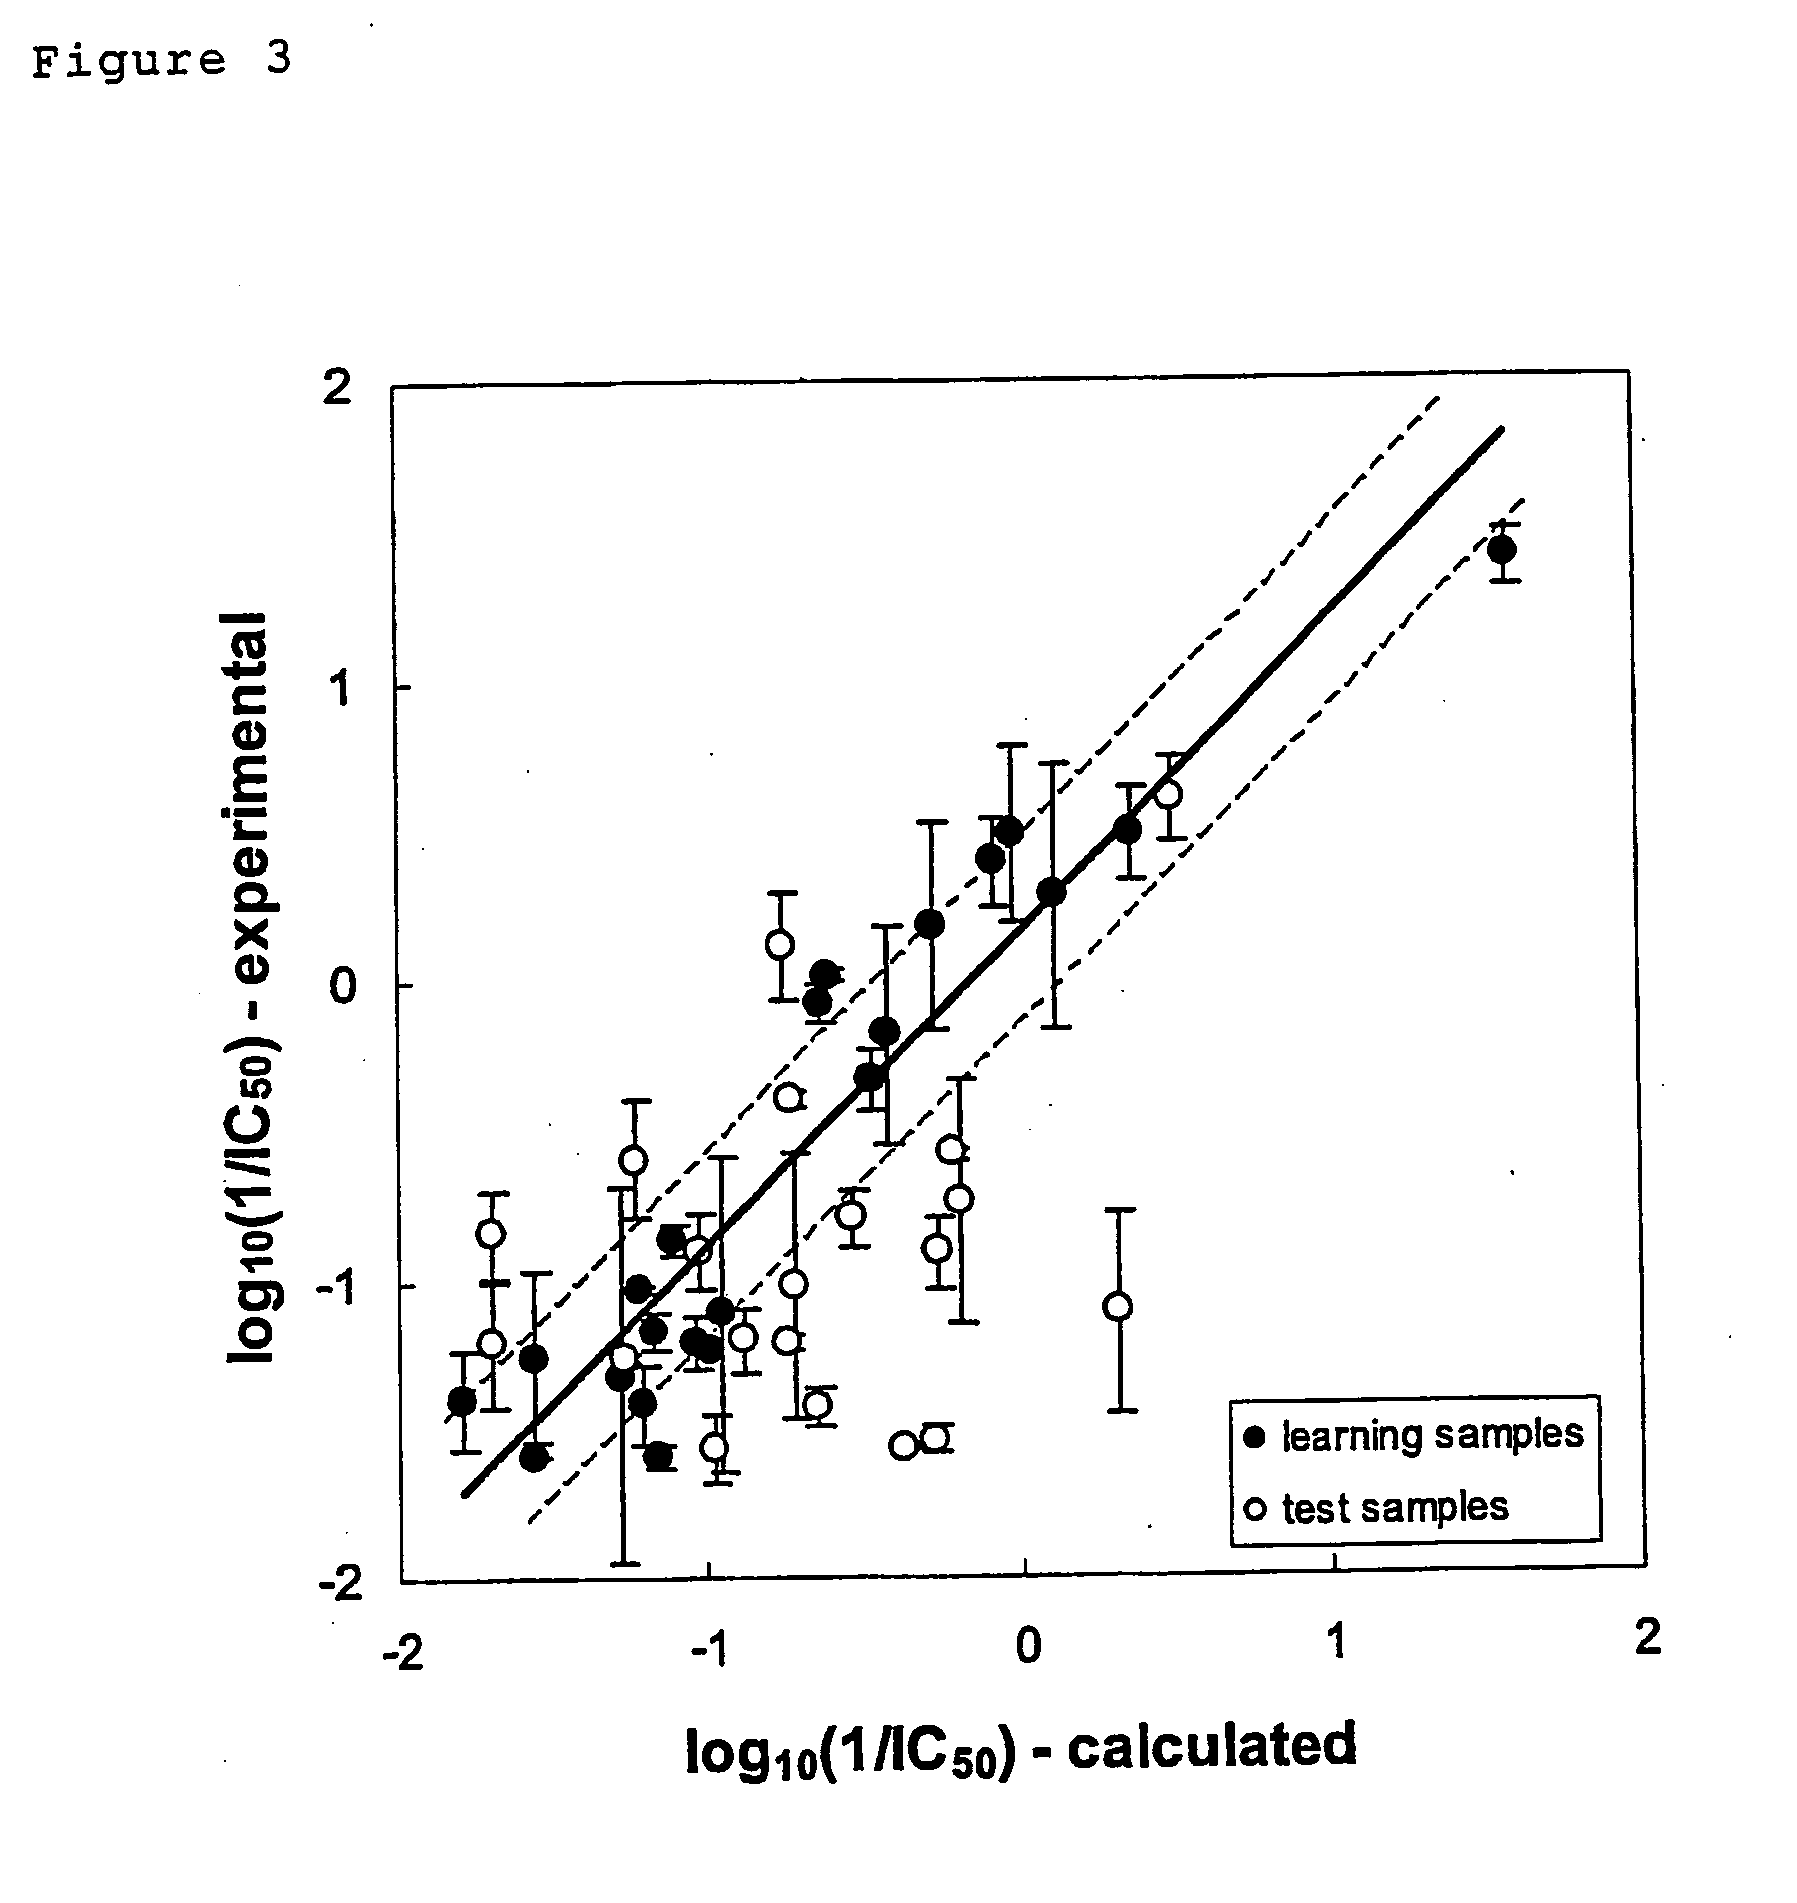 Method for selecting drug sensitivity-determining factors and method for predicting drug sensitivity using the selected factors